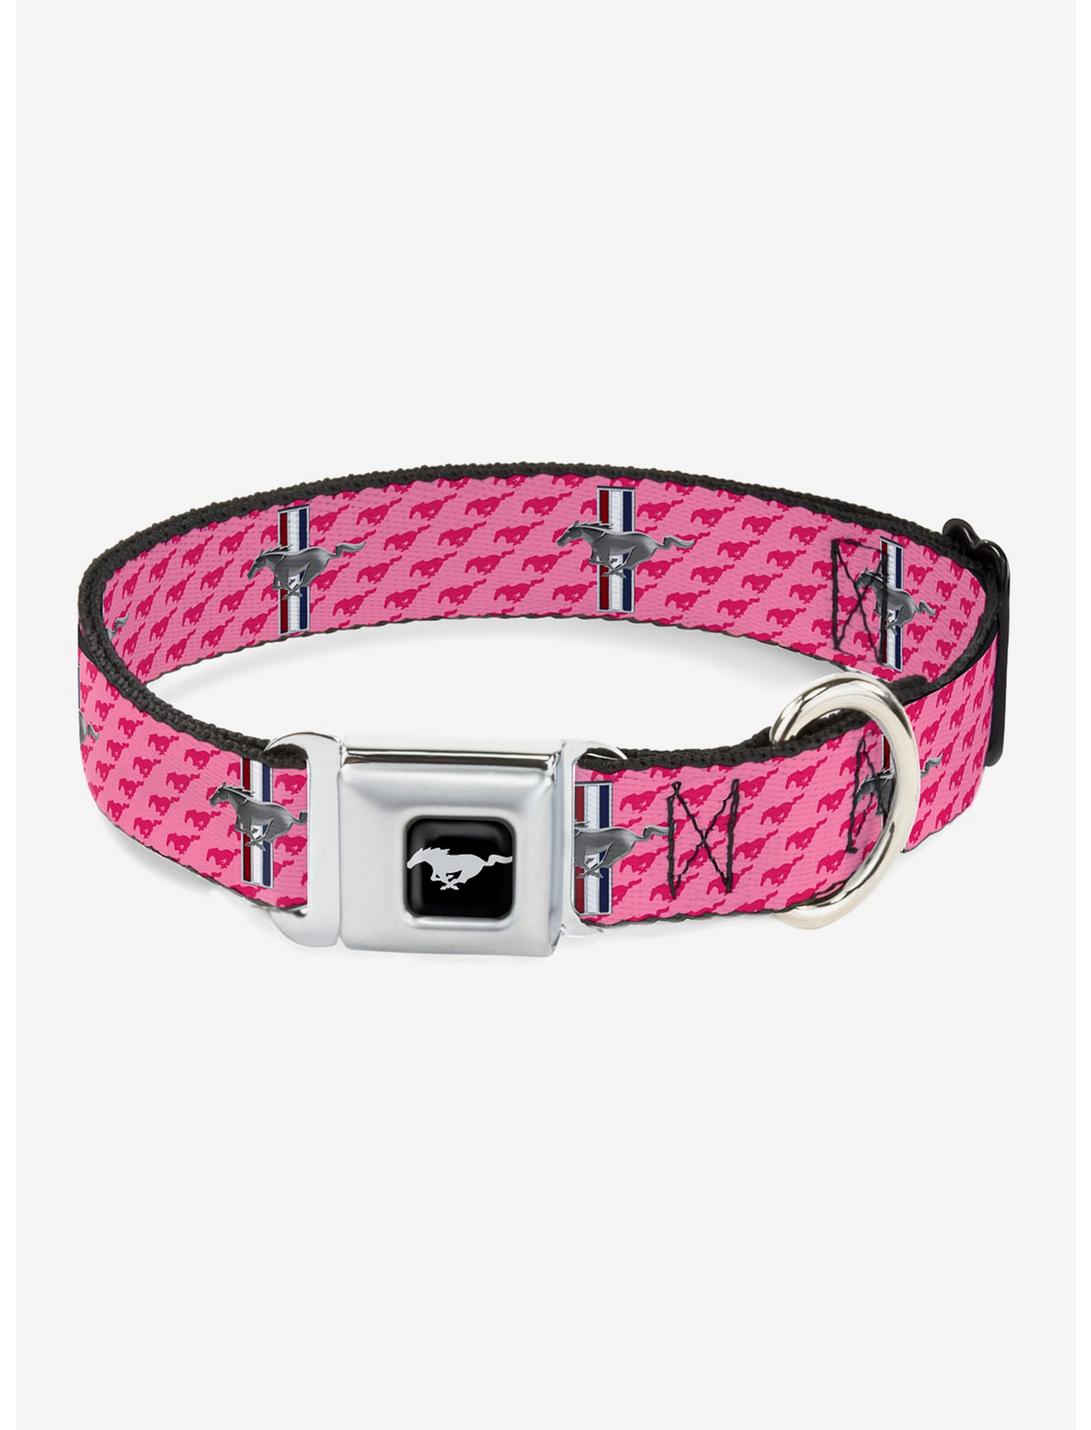 Ford Mustang Bars Text Pink Logo Repeat Seatbelt Buckle Dog Collar, MULTICOLOR, hi-res